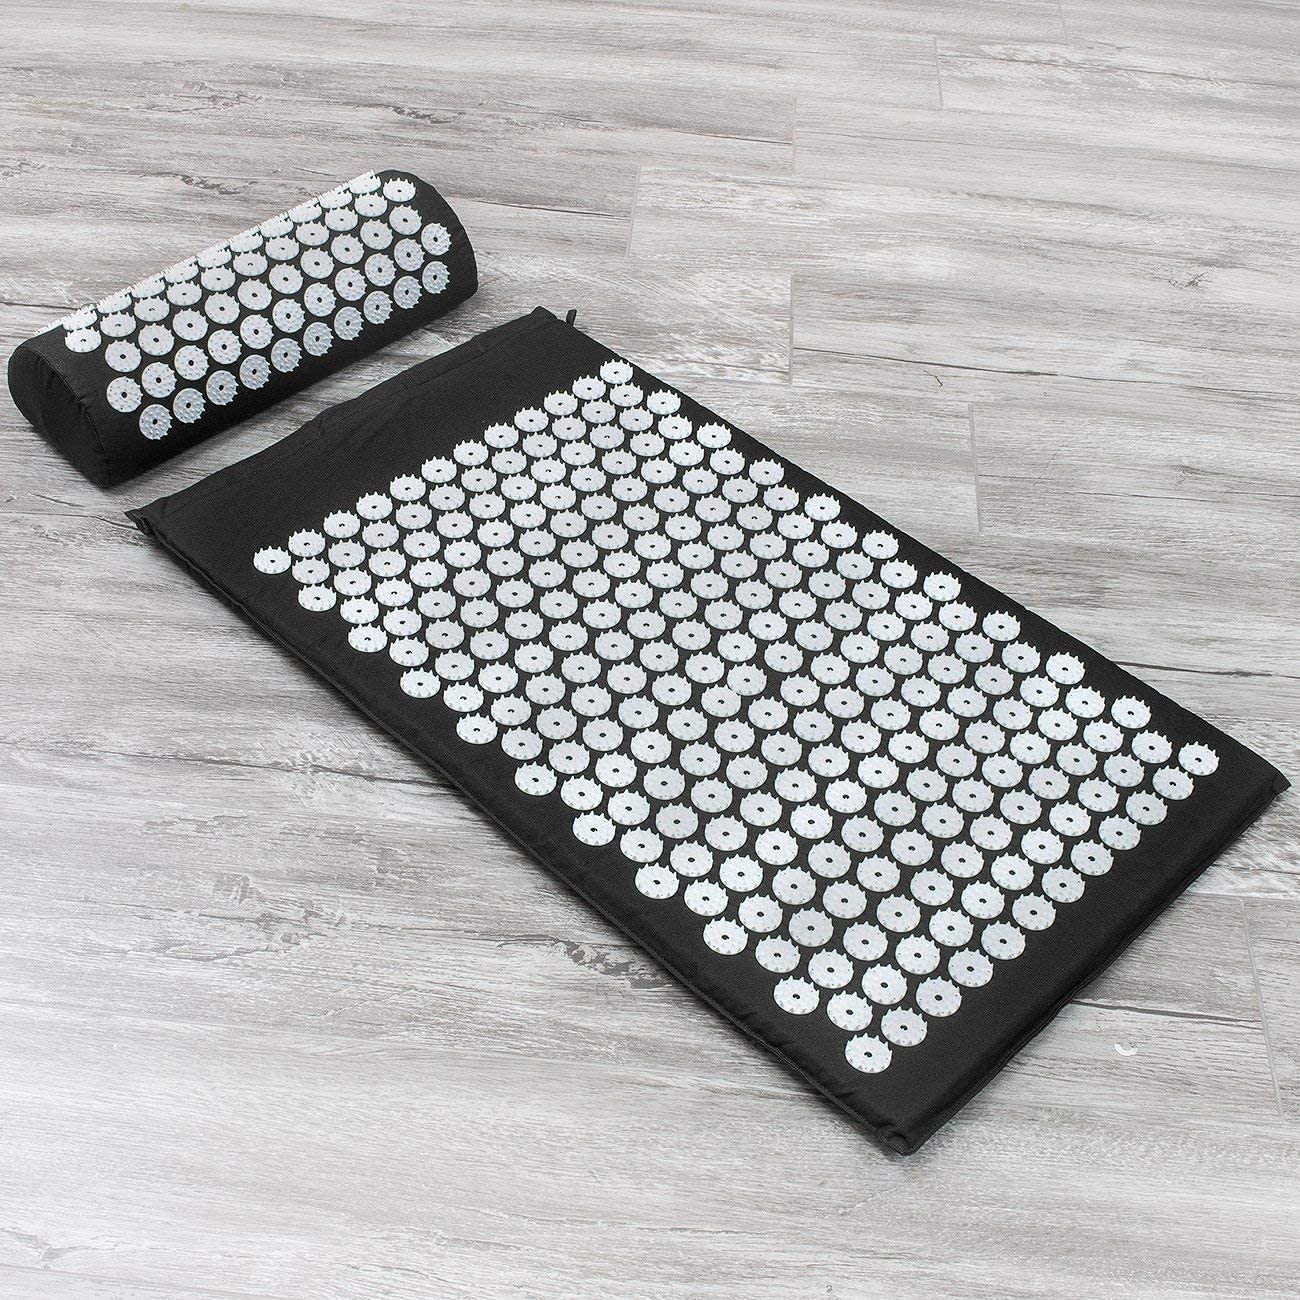 Silvan acupressure mat and pillow set for home, gym and more